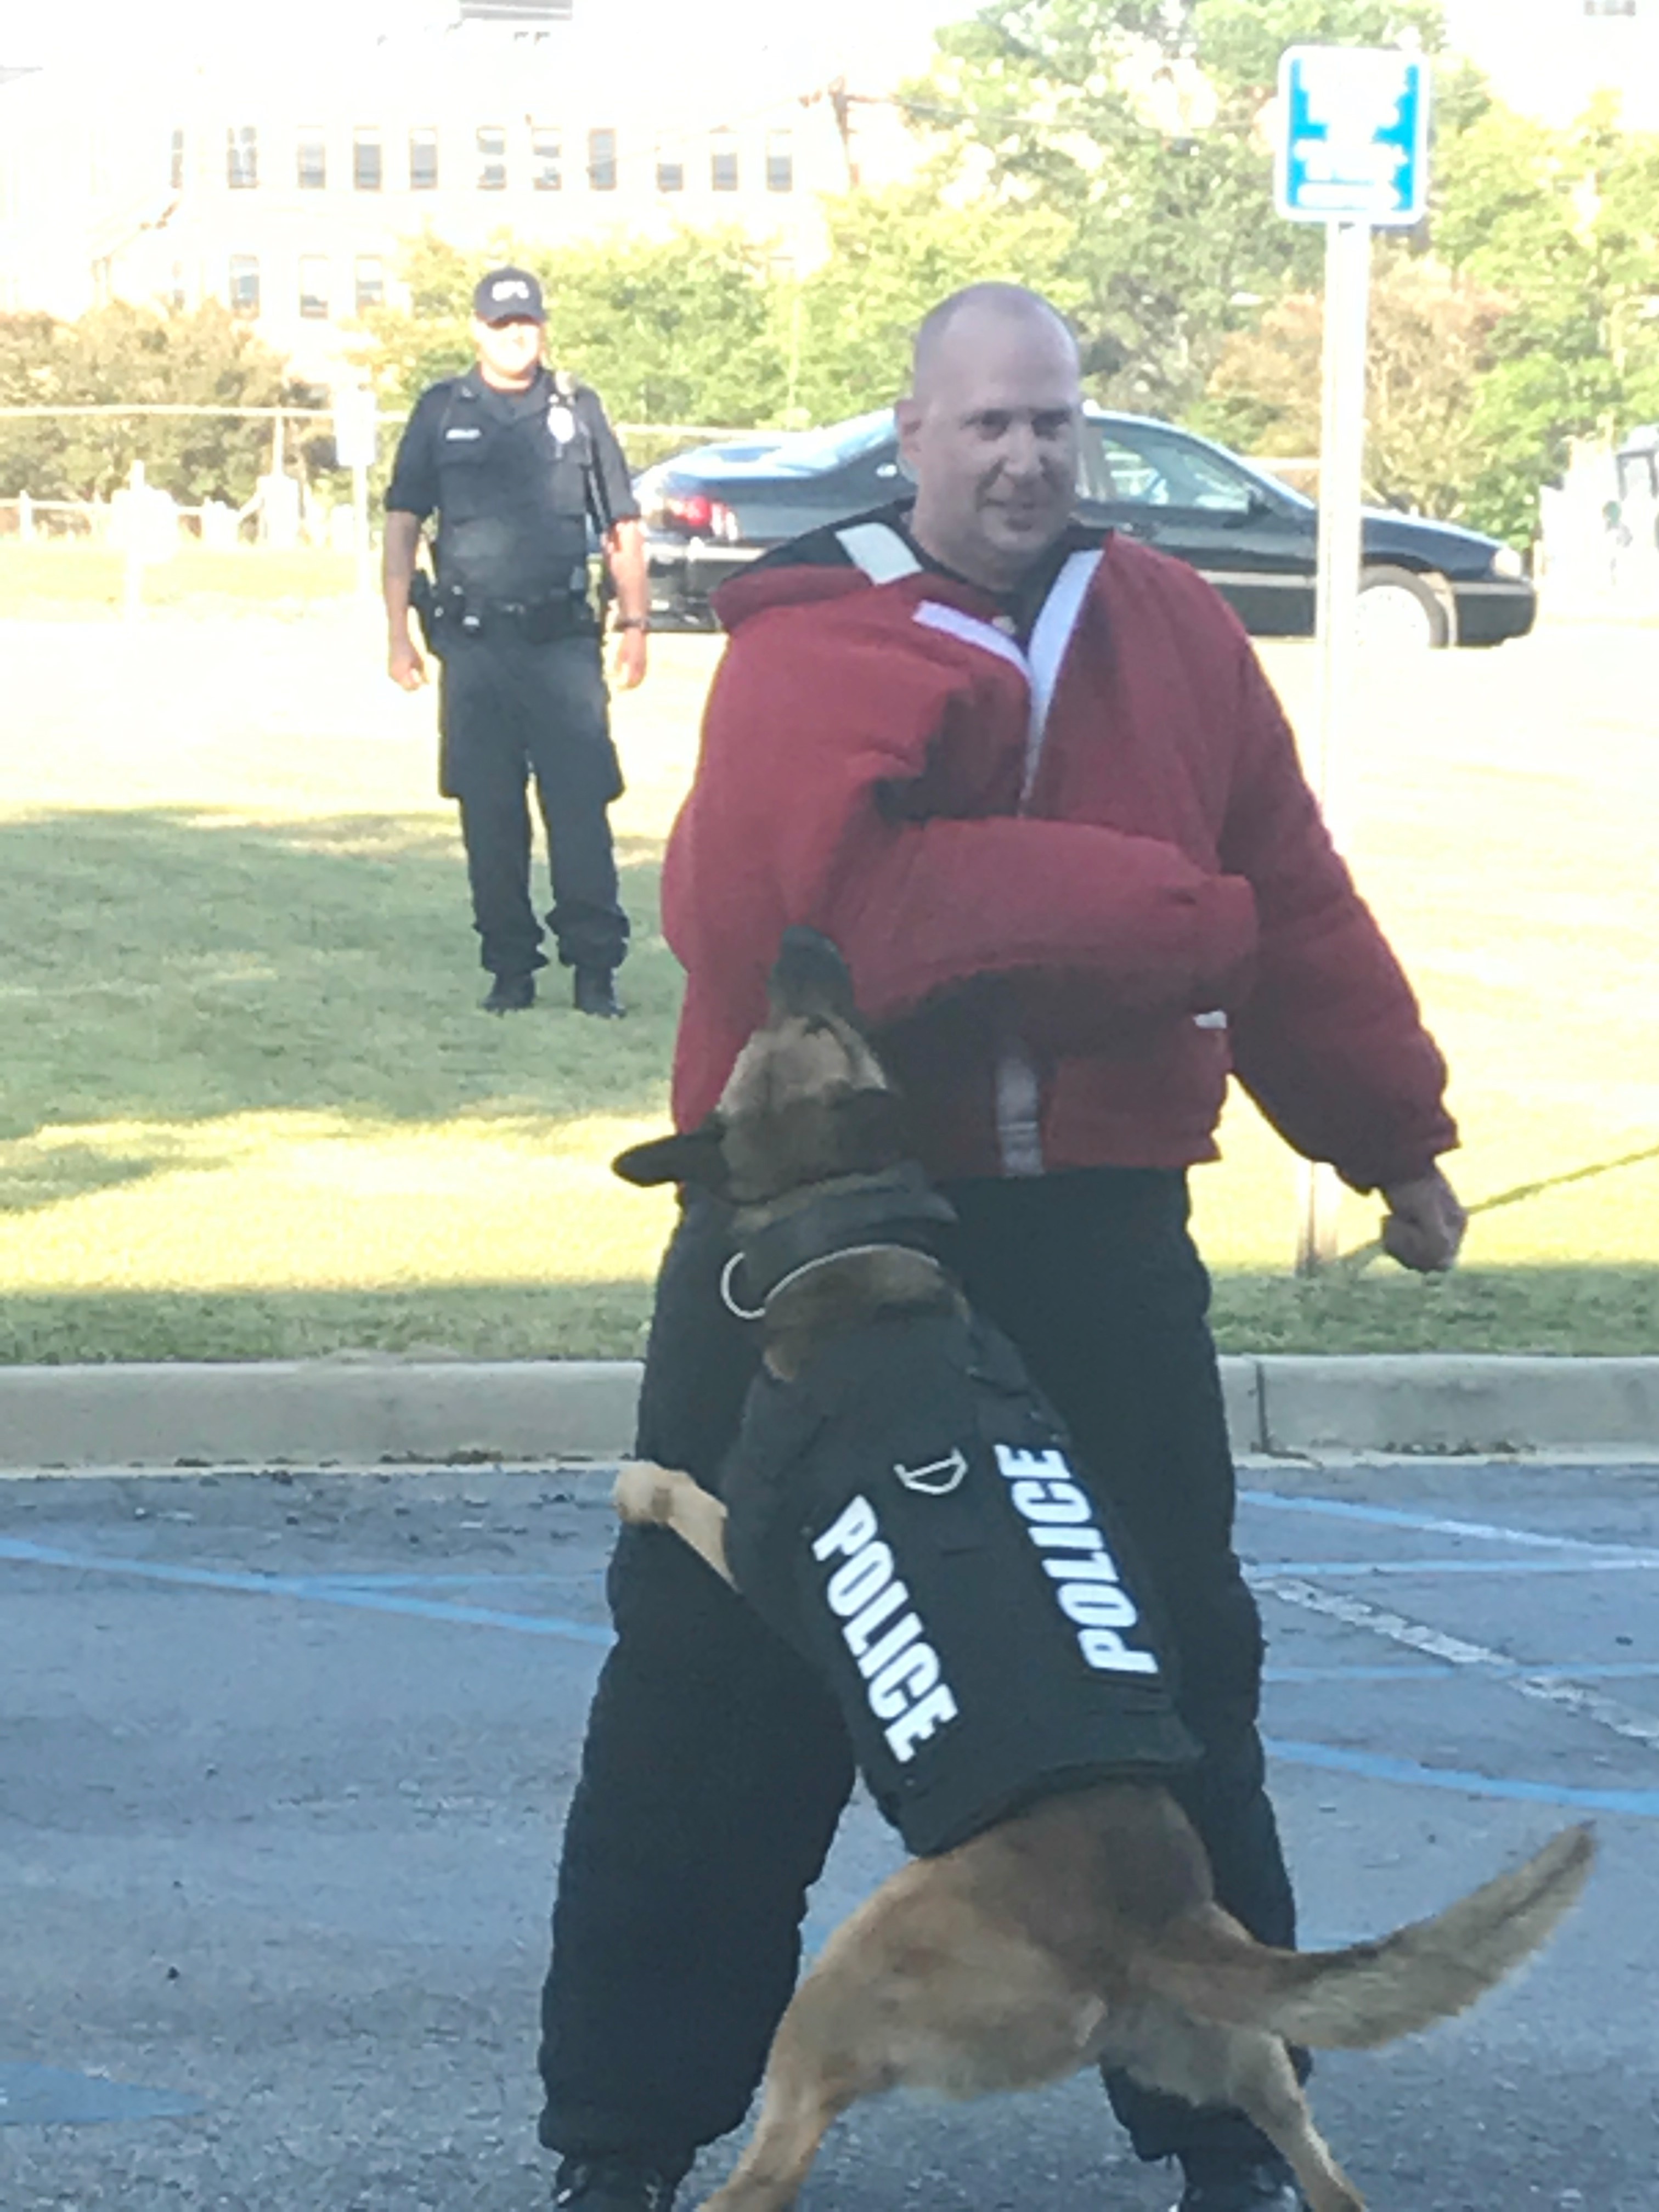 Columbia Police Department K-9 demonstrates how to apprehend a suspect